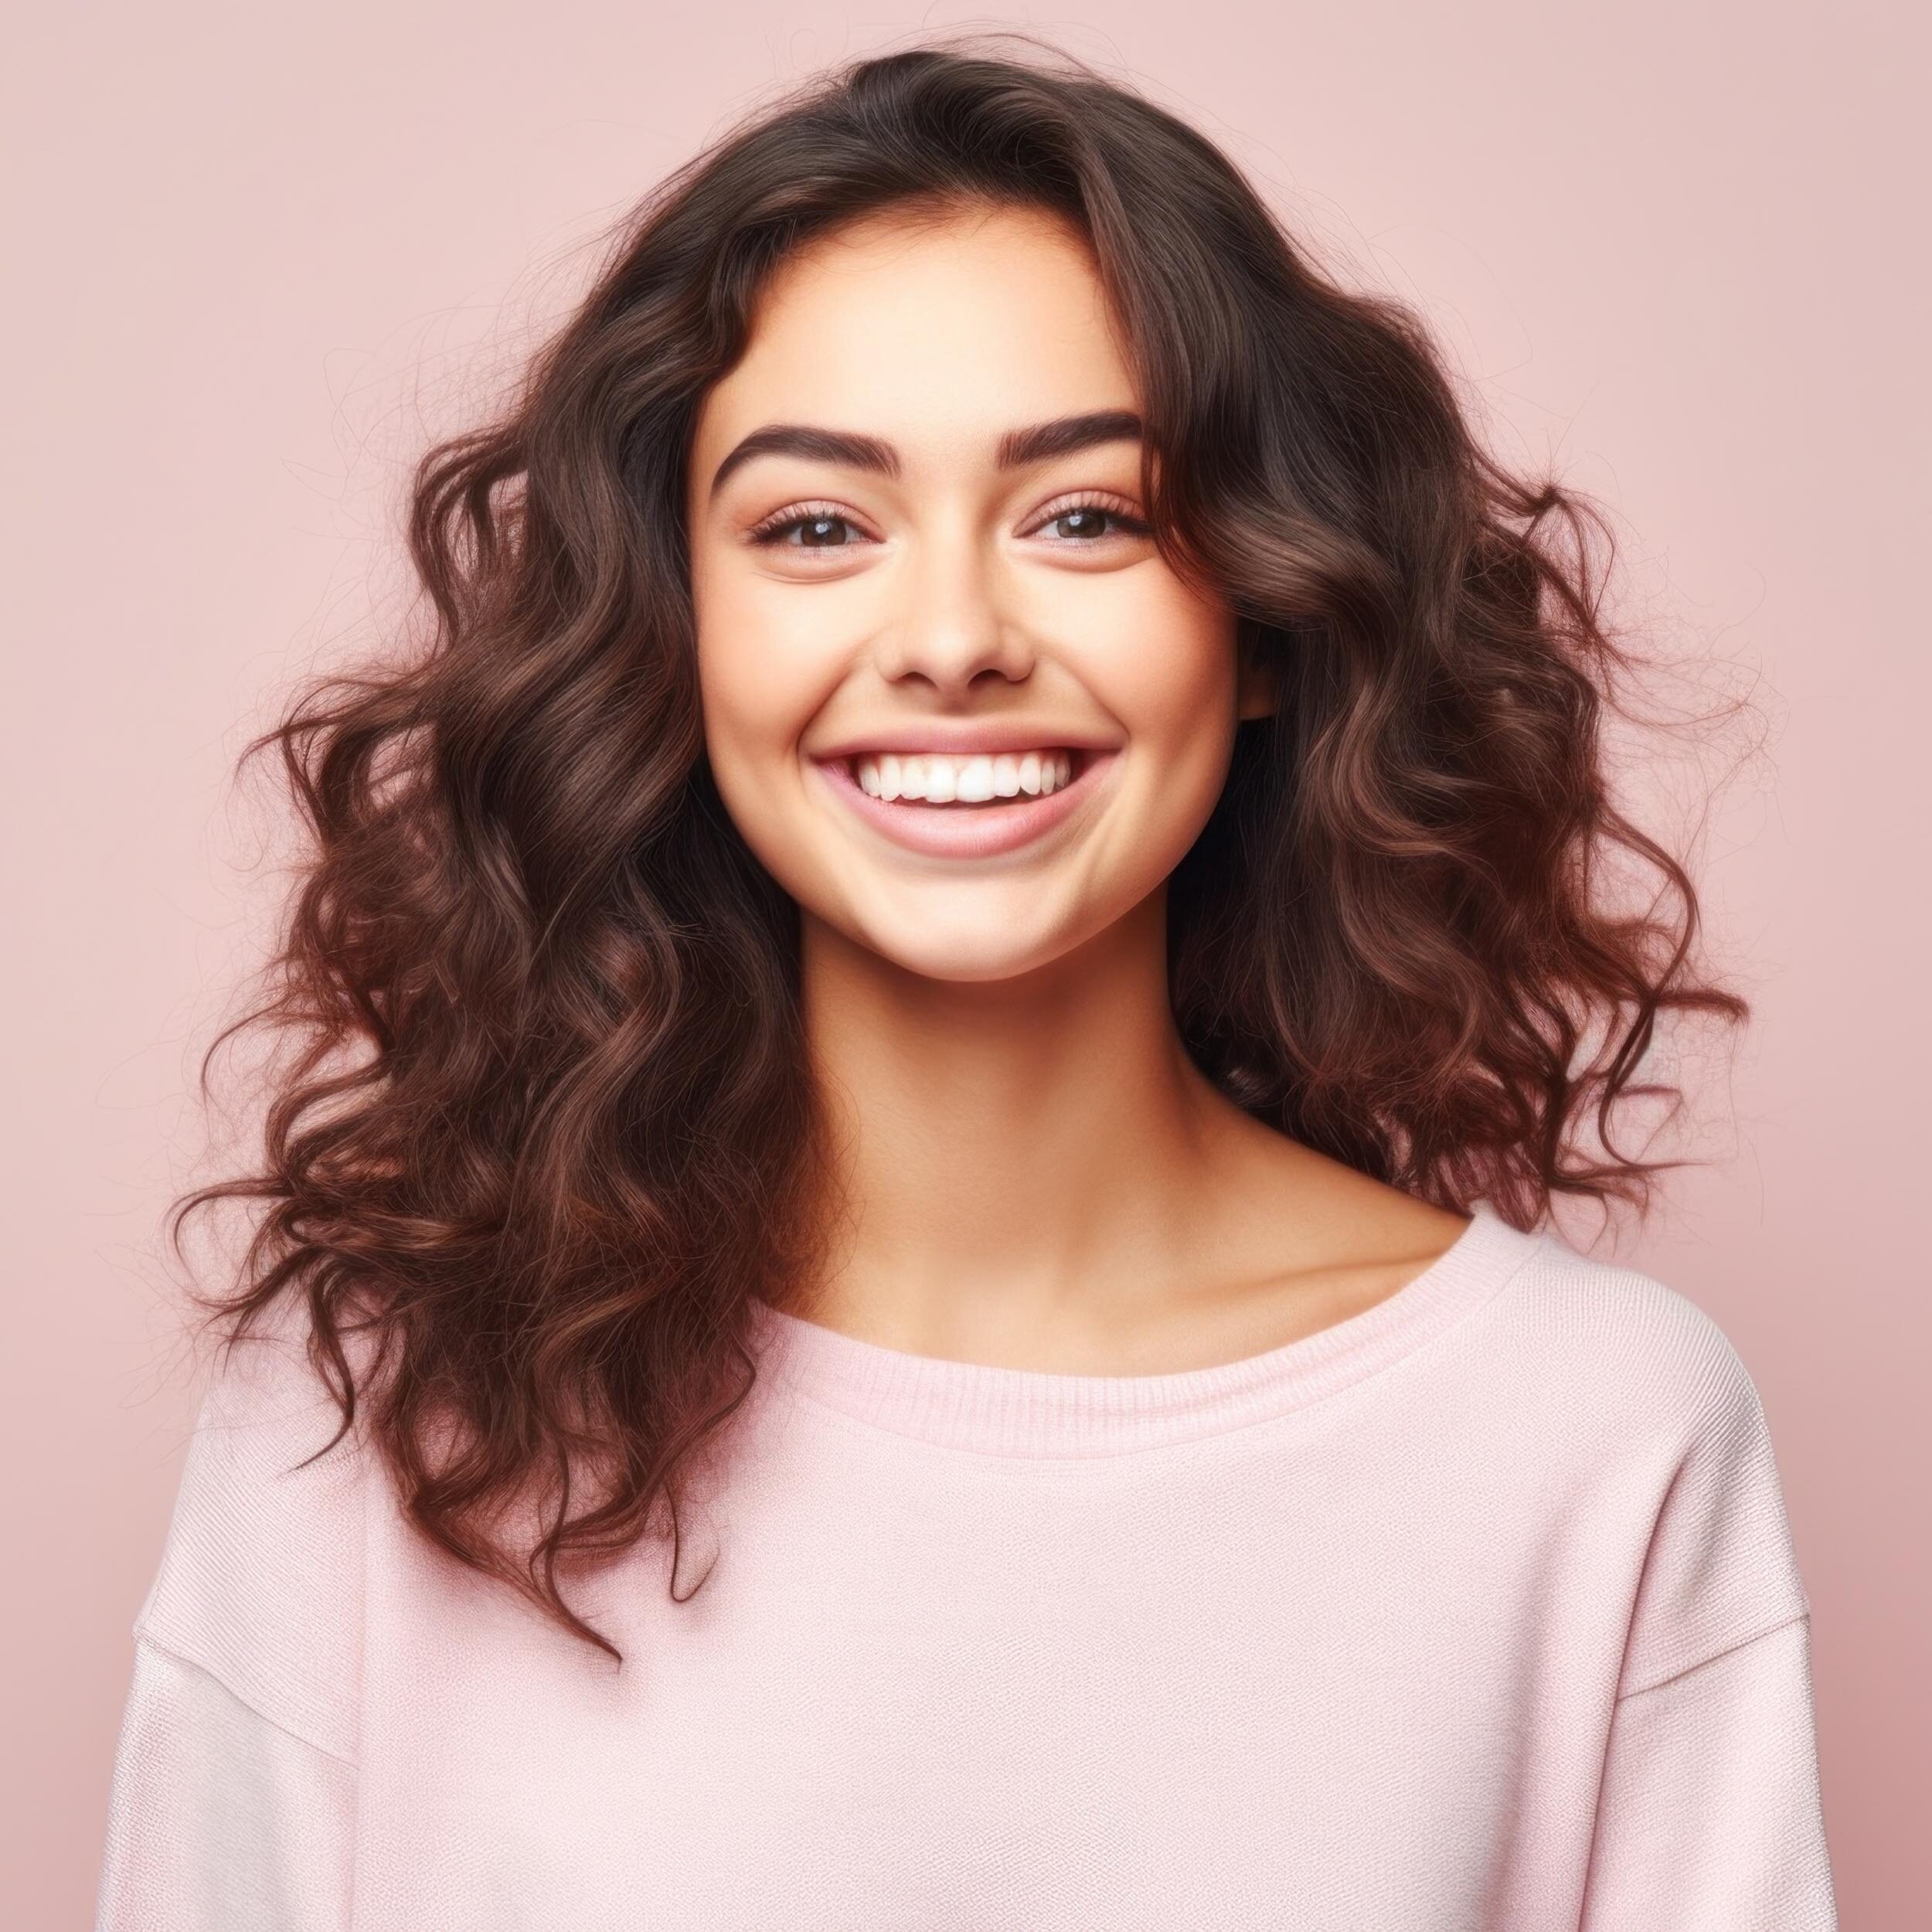 In this heartwarming portrait, a young teen girl's genuine smile takes center stage against a neutral studio background, a symbol of her youthful spirit and happiness.